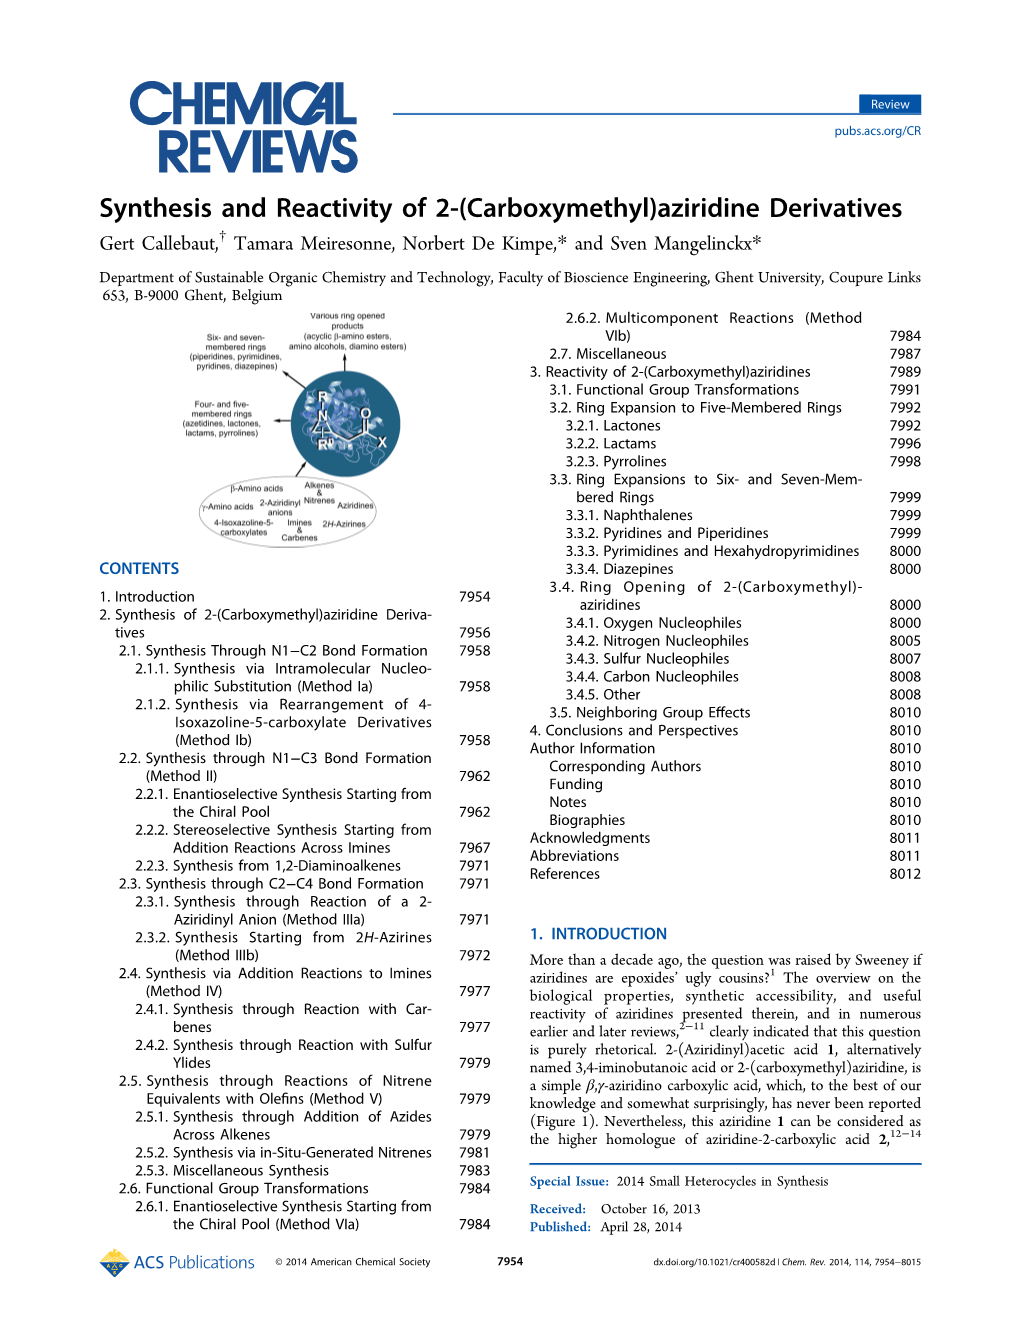 Synthesis and Reactivity of 2‑(Carboxymethyl)Aziridine Derivatives